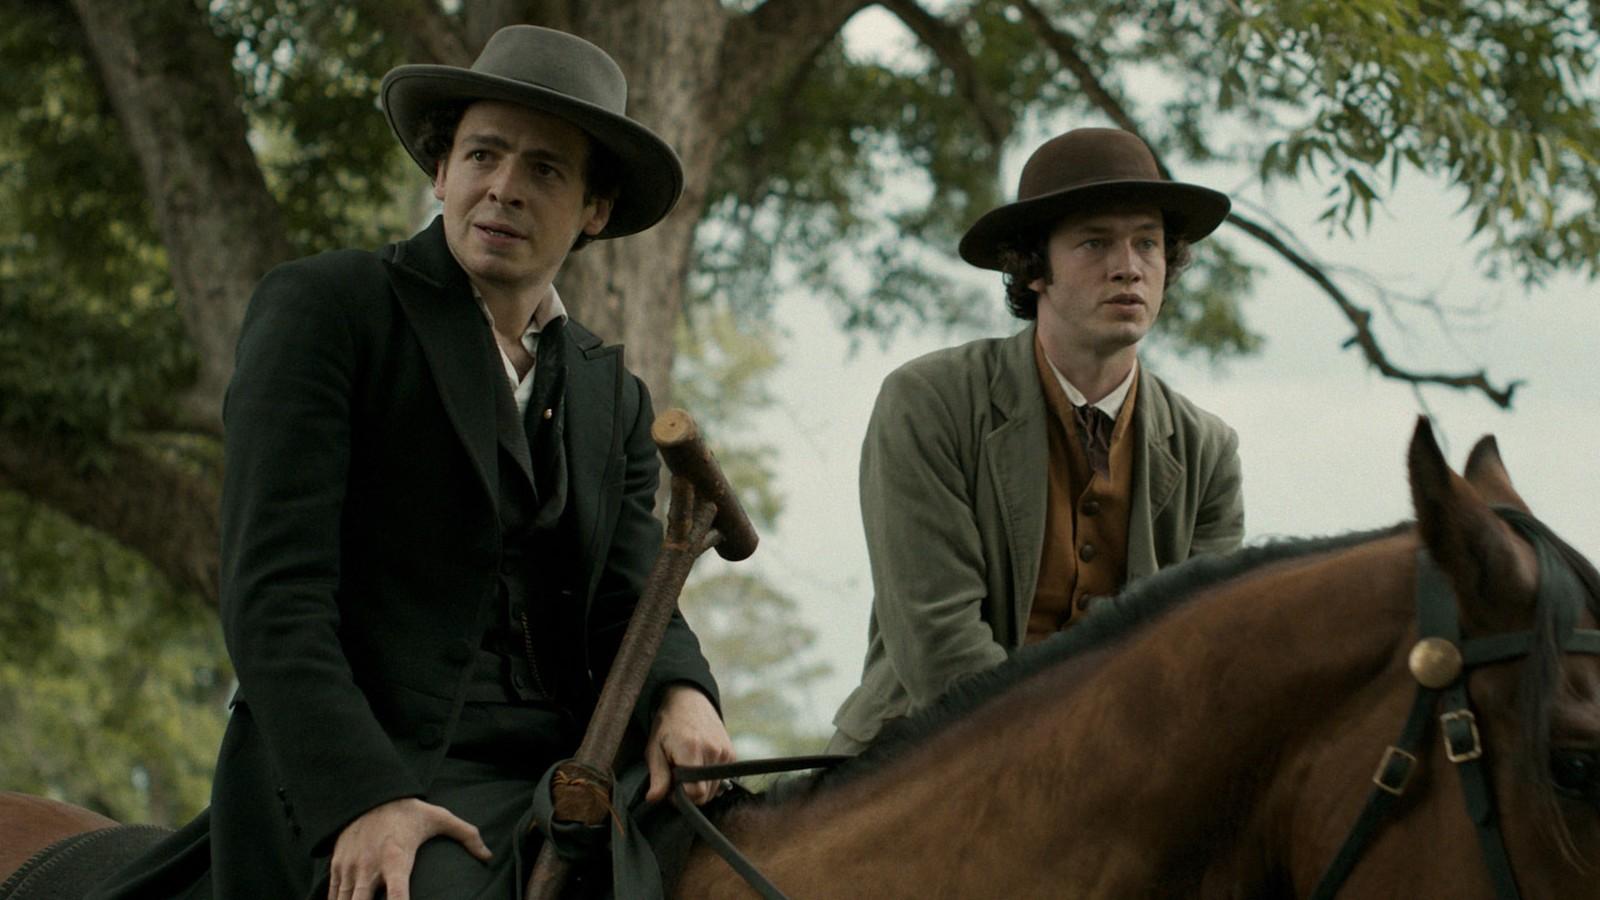 Anthony Boyle - on the left and playing John Wilkes Booth - riding a horse in Manhunt.